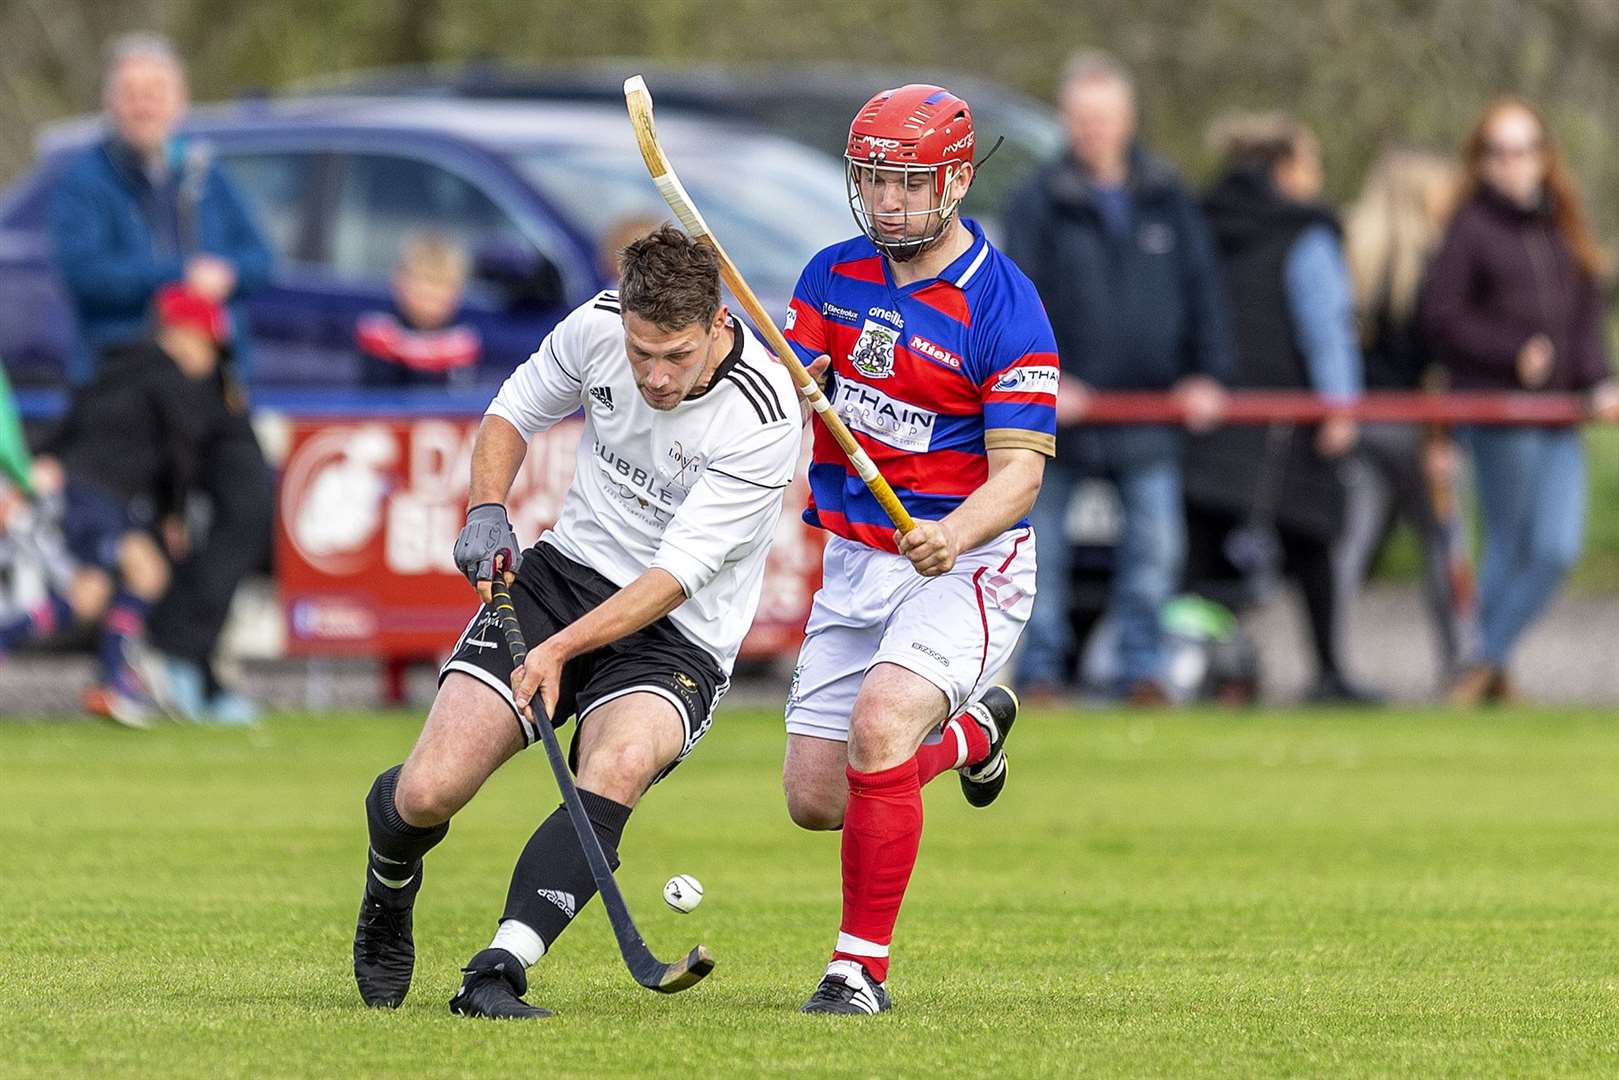 Lovat's Daniel Grieve gets to the ball before Savio Genini (Kingussie). Kingussie v Lovat in the cottages.com MacTavish Cup semi final played at The Dell, Kingussie.